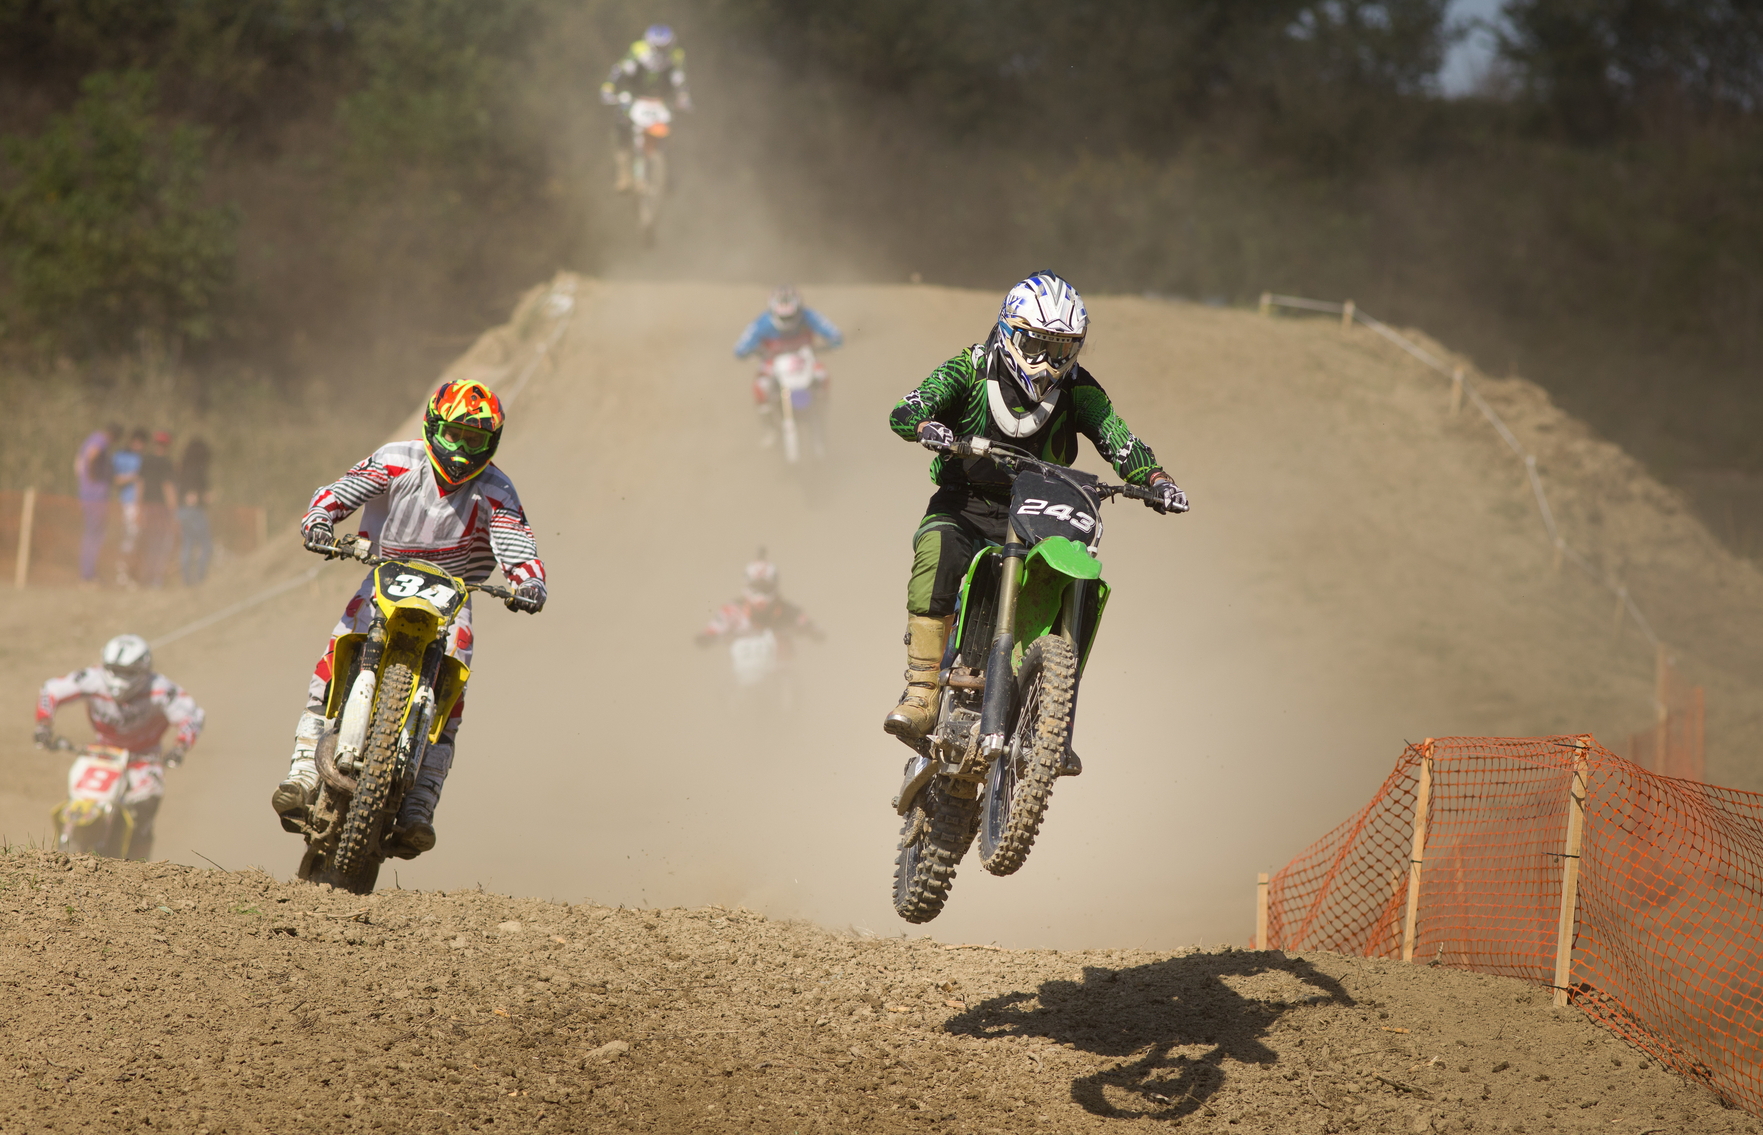 Bikers riding motorcycles in mud at off road race